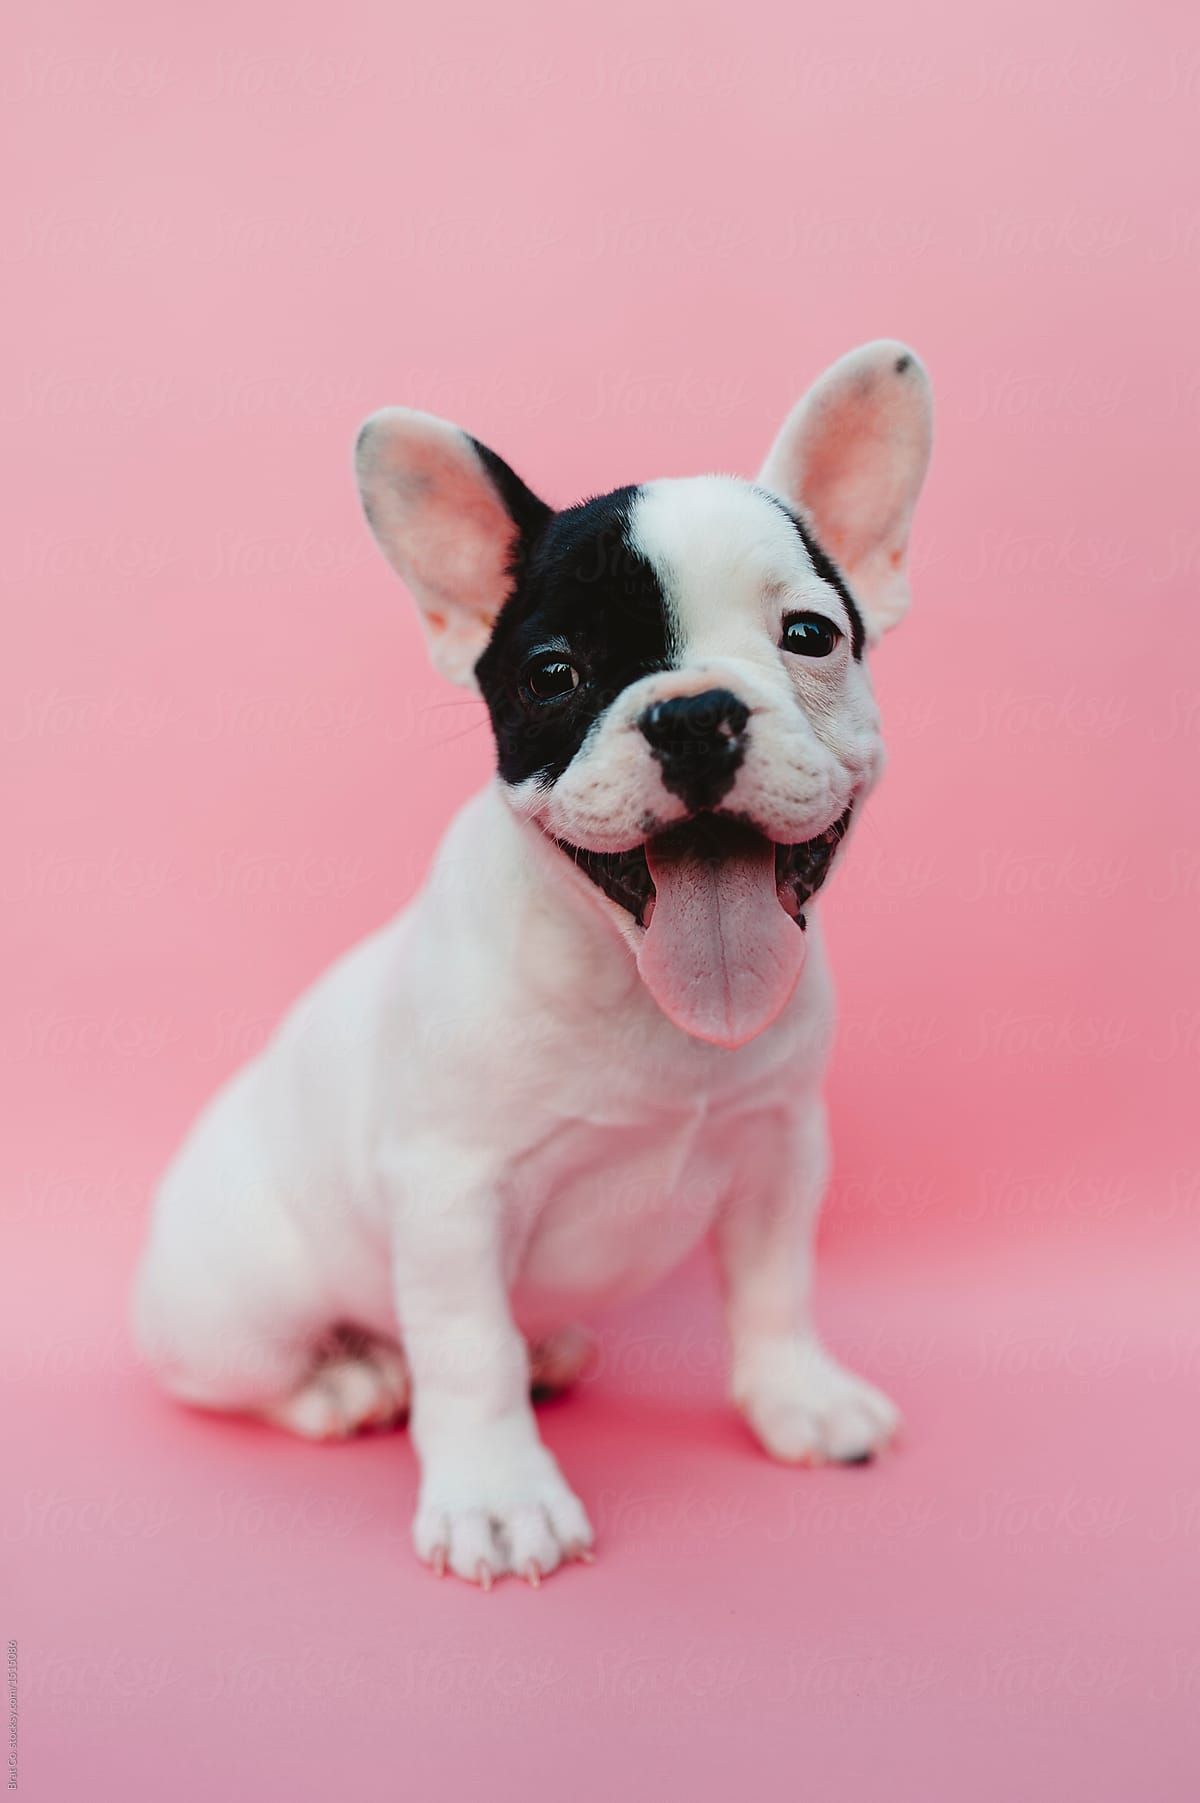 French Bulldog Puppy on Pink Background by Brat Co. for Stocksy United. Bulldog puppies, French bulldog puppy, Pink puppy